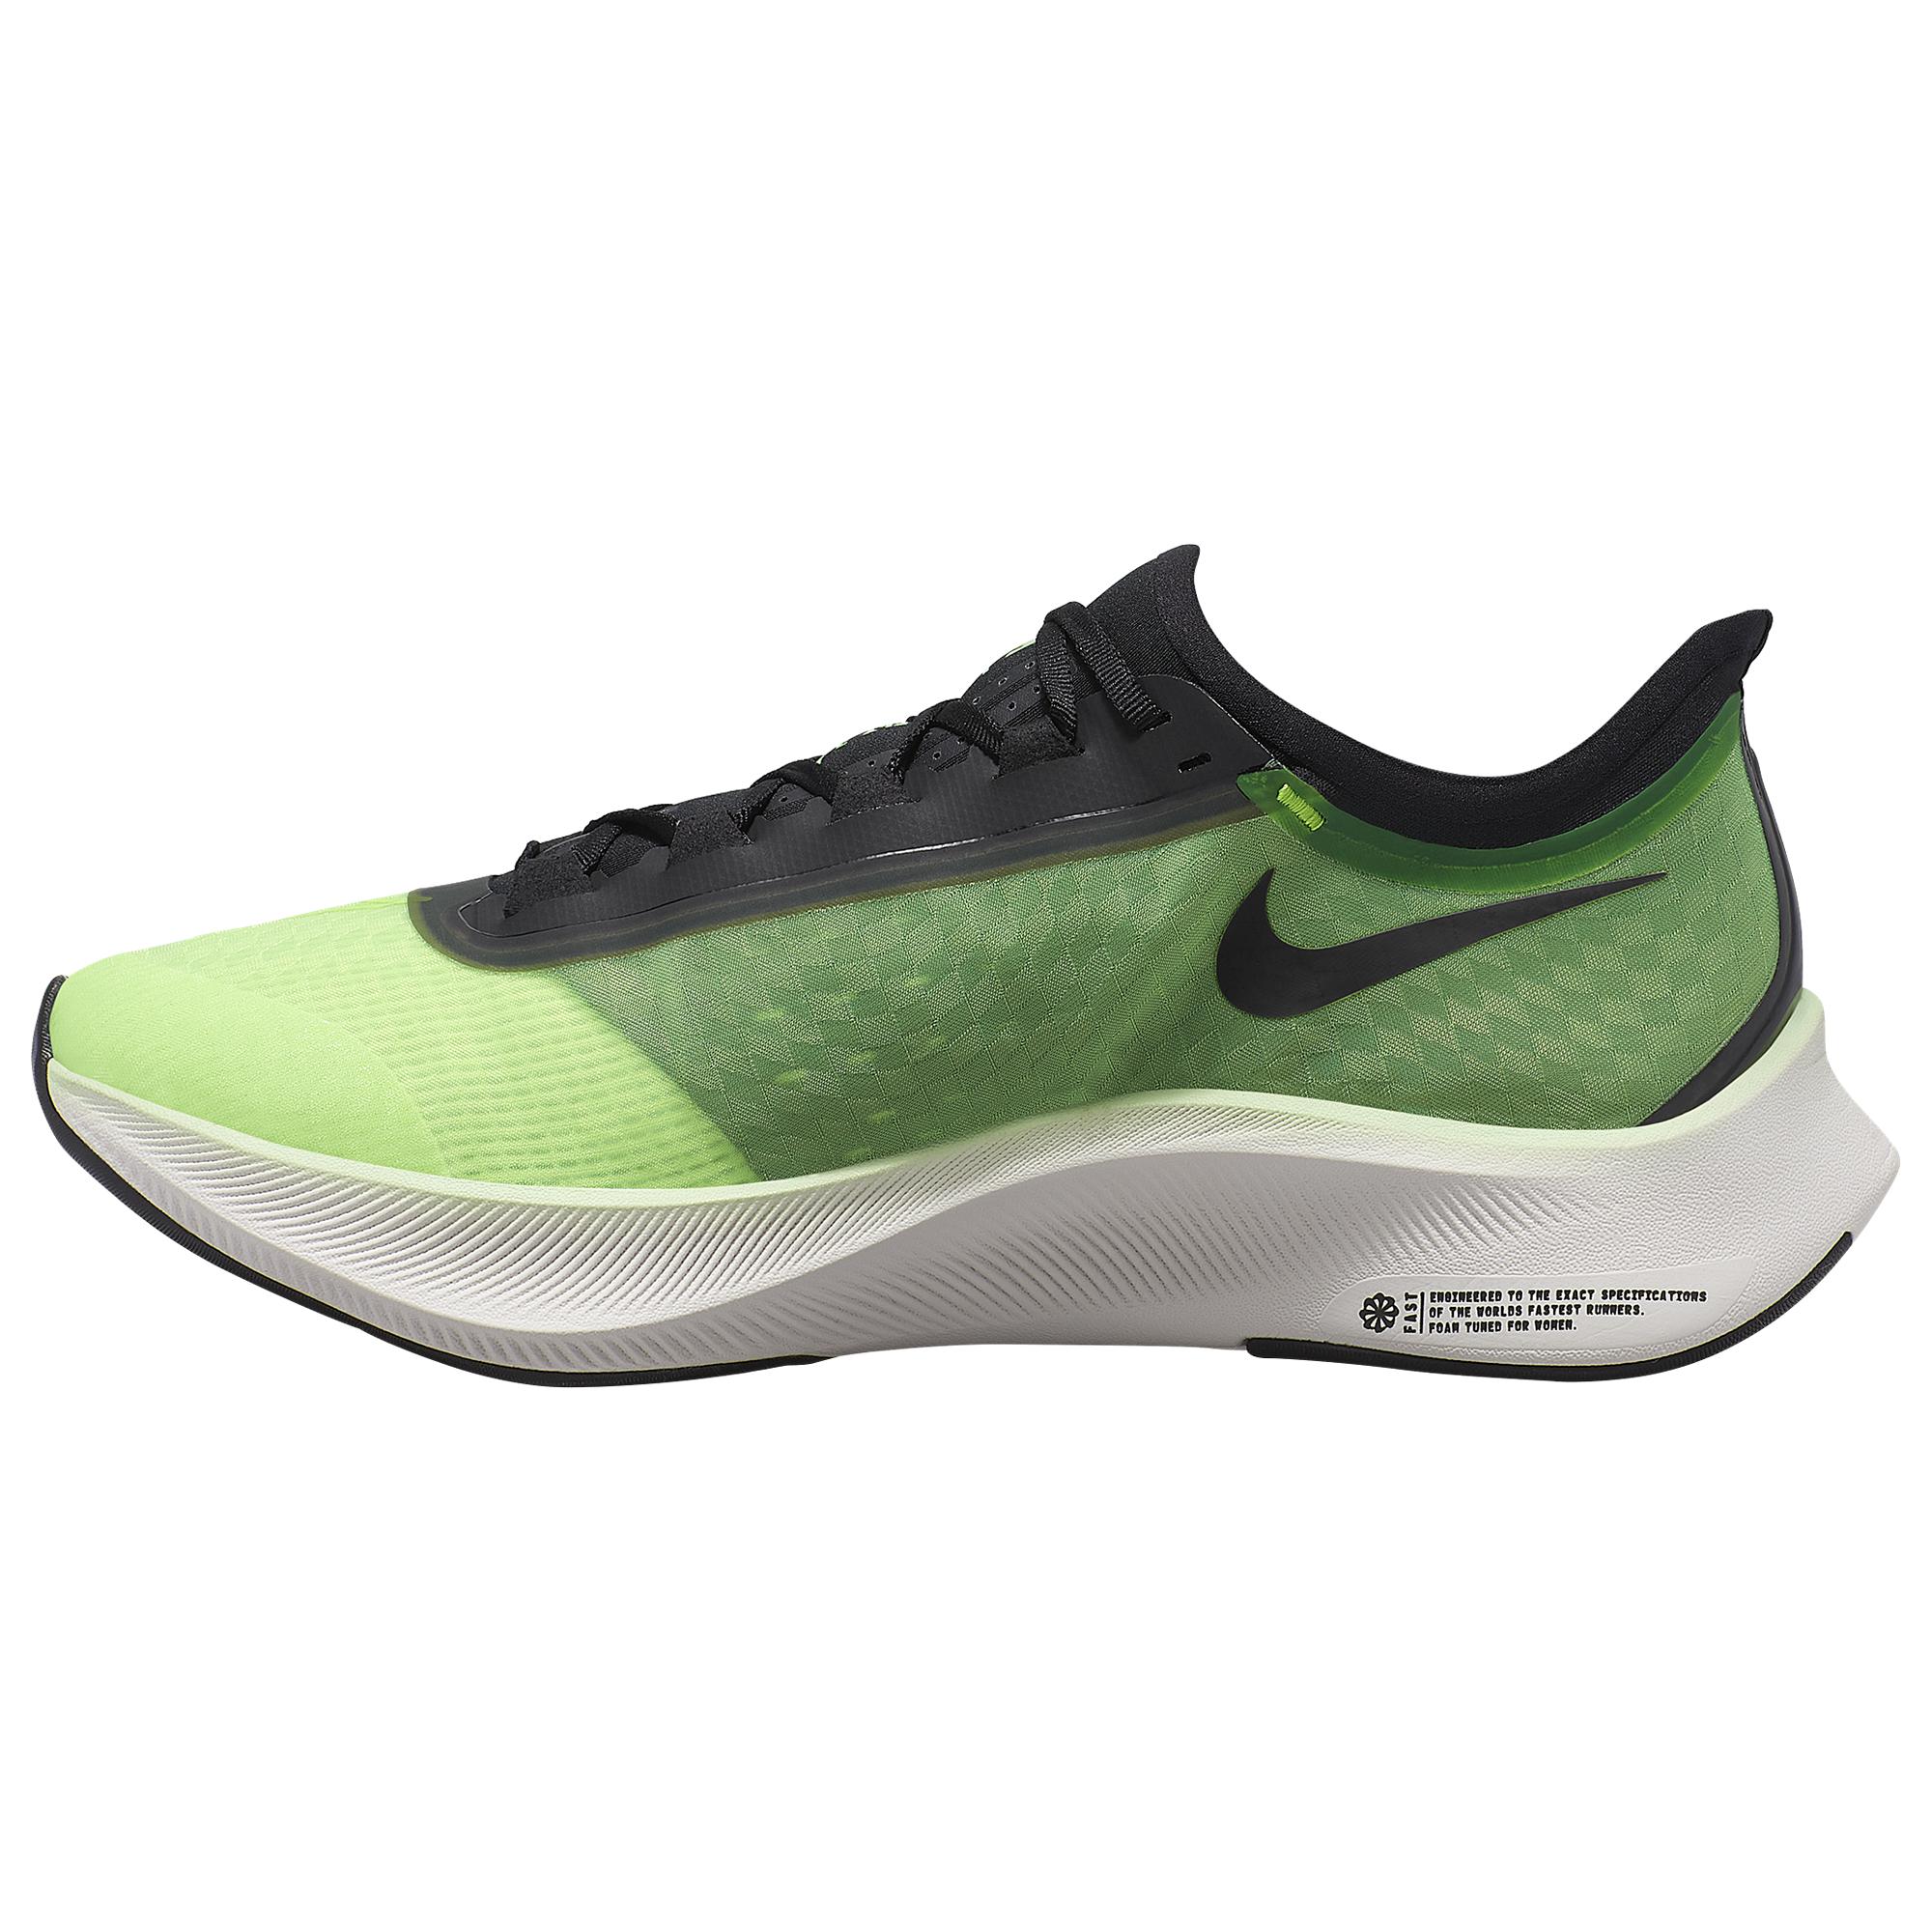 Nike Rubber Zoom Fly 3 Racing Flats in Green for Men - Lyst